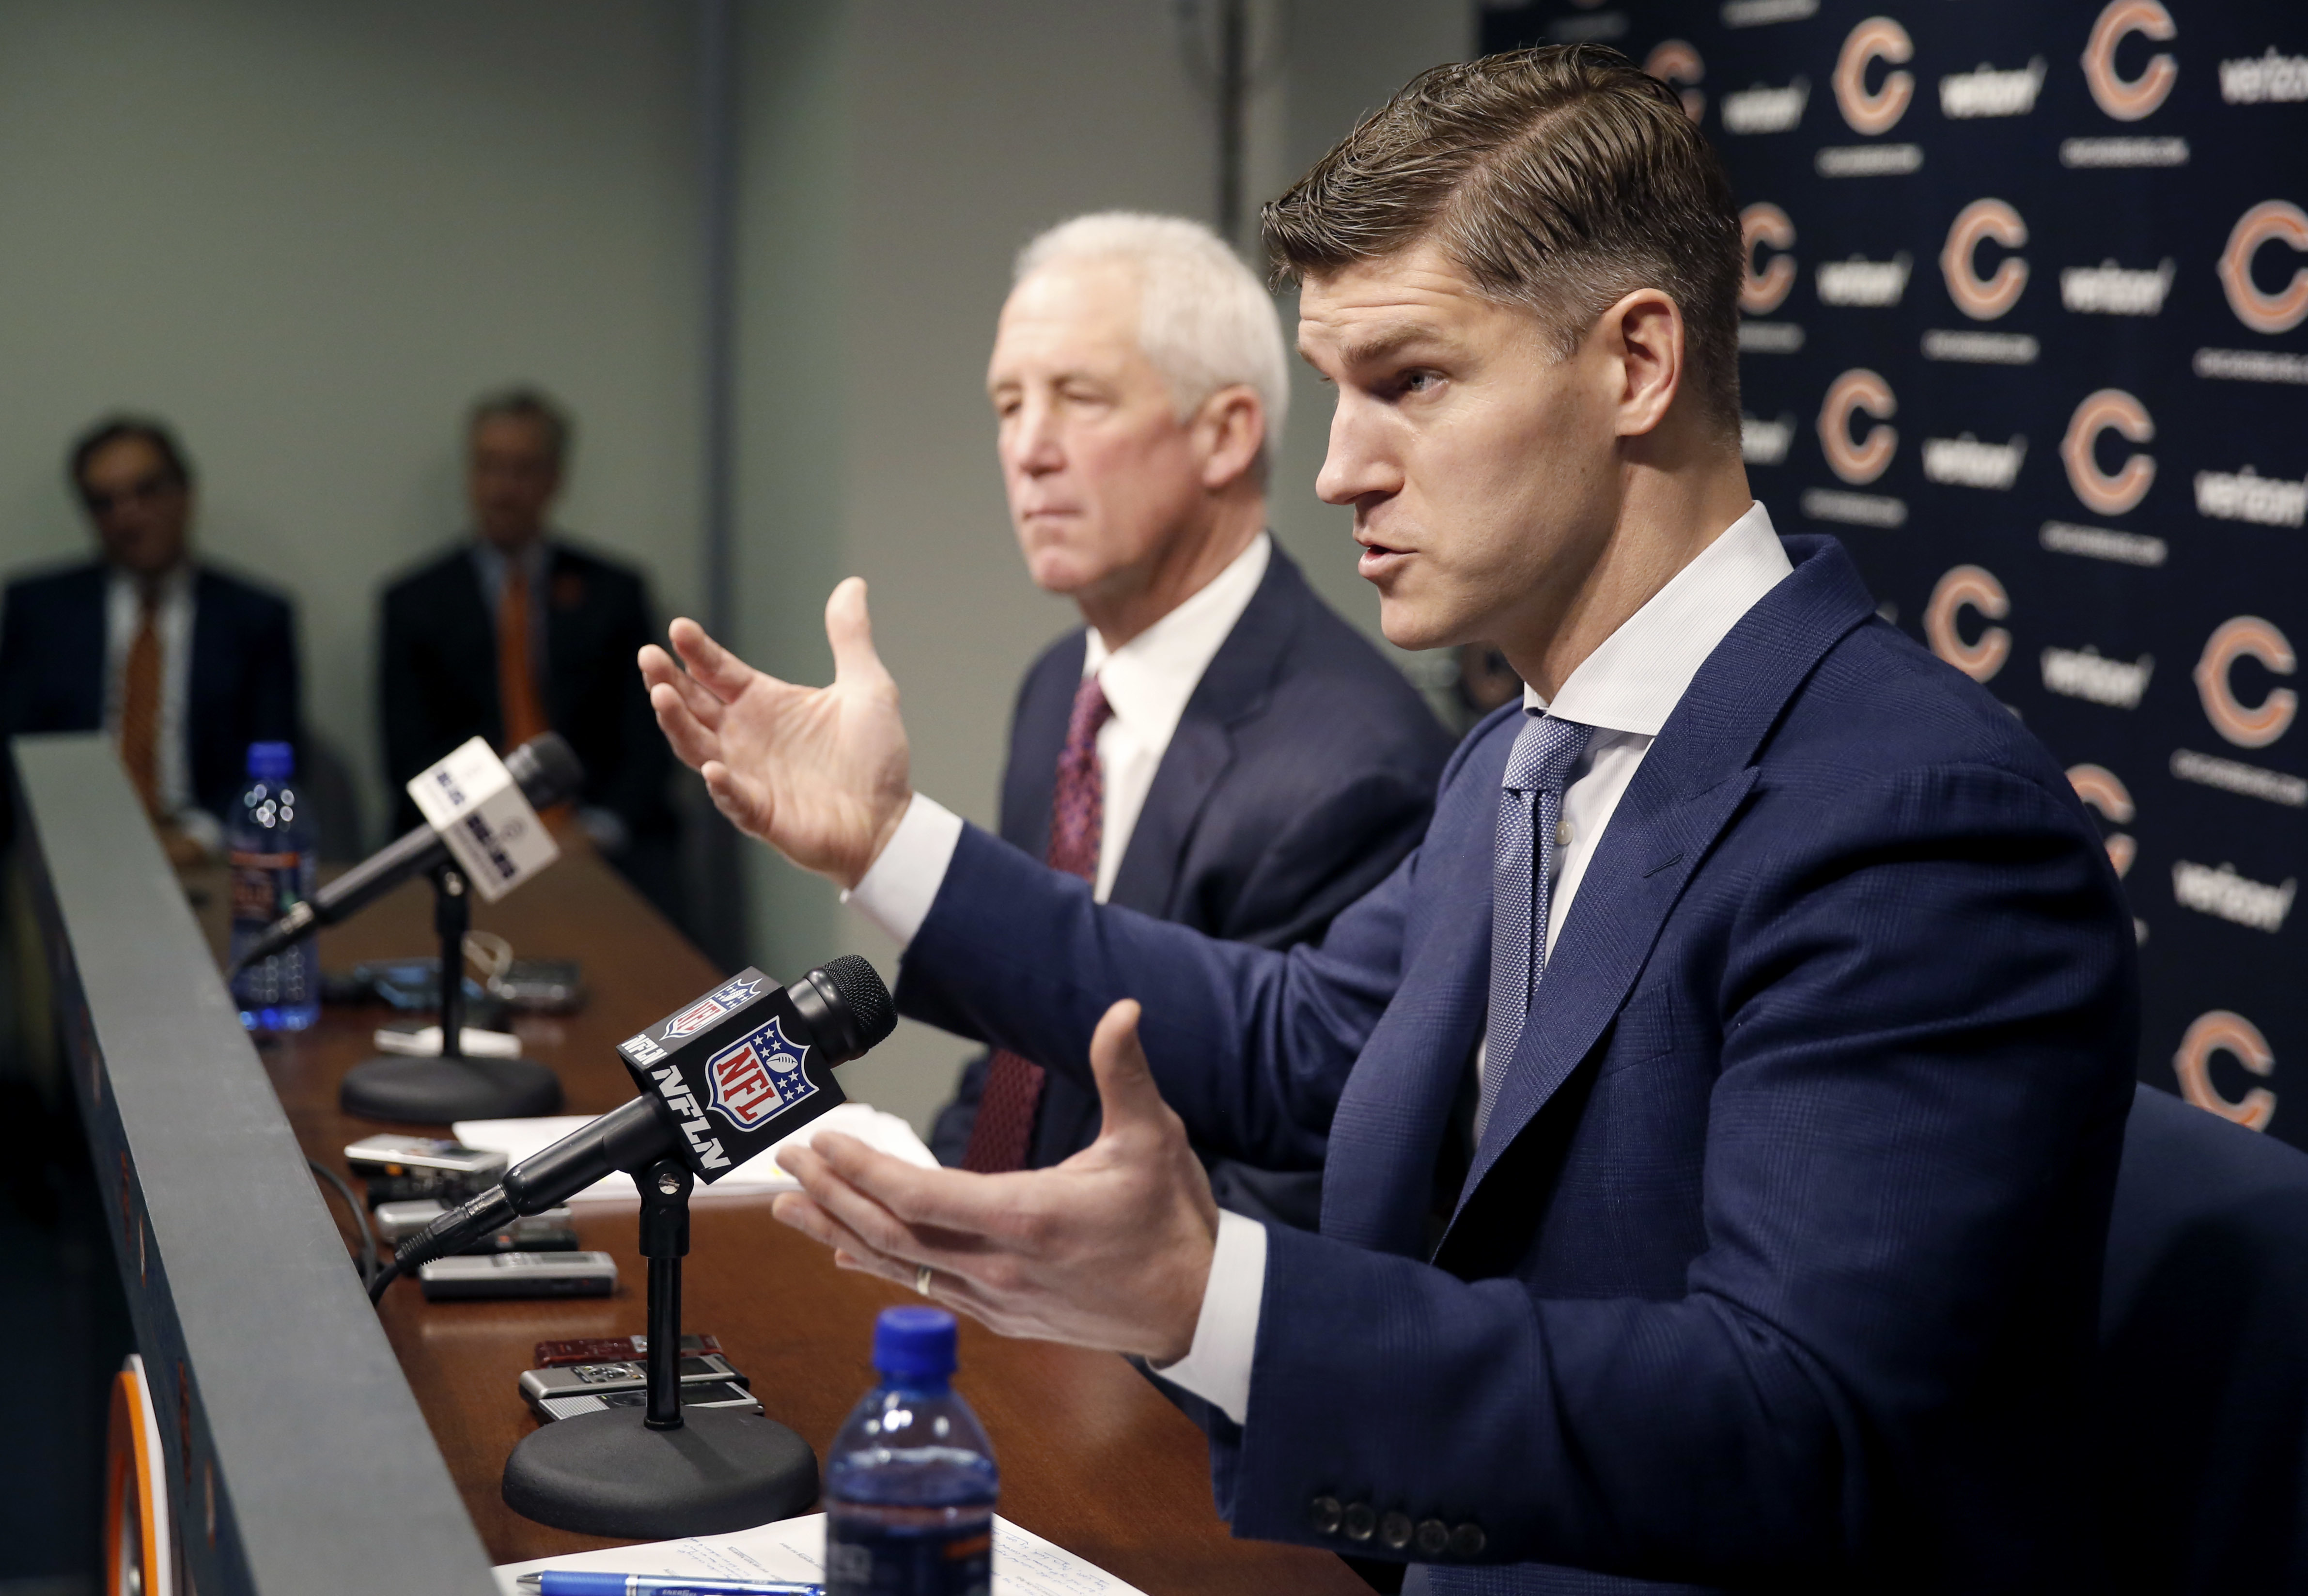 Chicago Bears general manager Ryan Pace, right, and coach John Fox talk to reporters during an end of season NFL football news conference Wednesday, Jan. 4, 2017, in Lake Forest, Ill. (AP Photo/Charles Rex Arbogast)